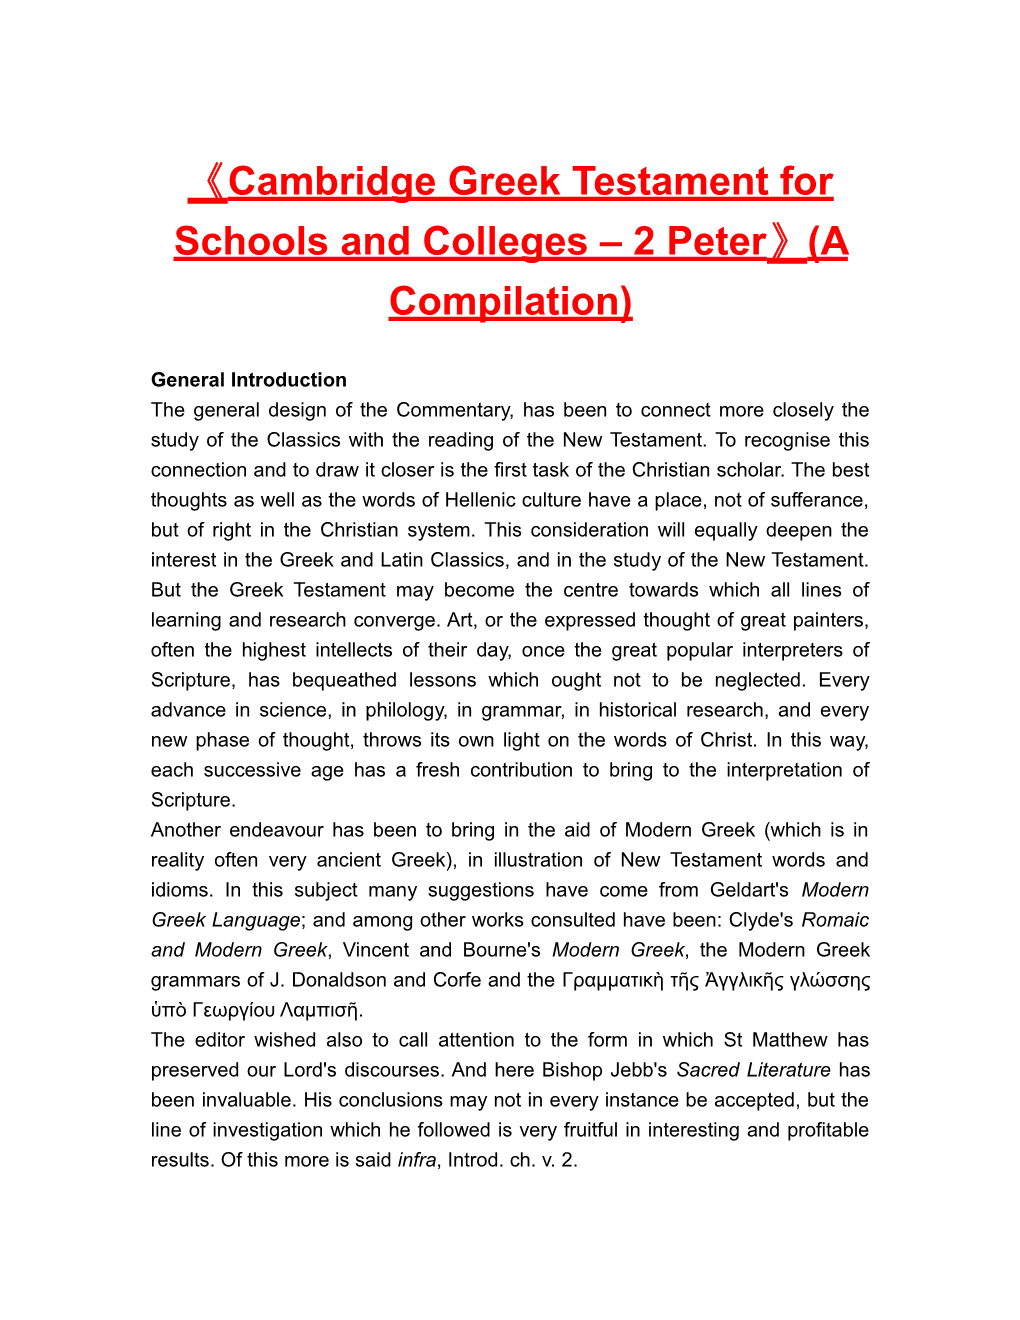 Cambridge Greek Testament for Schools and Colleges 2 Peter (A Compilation)